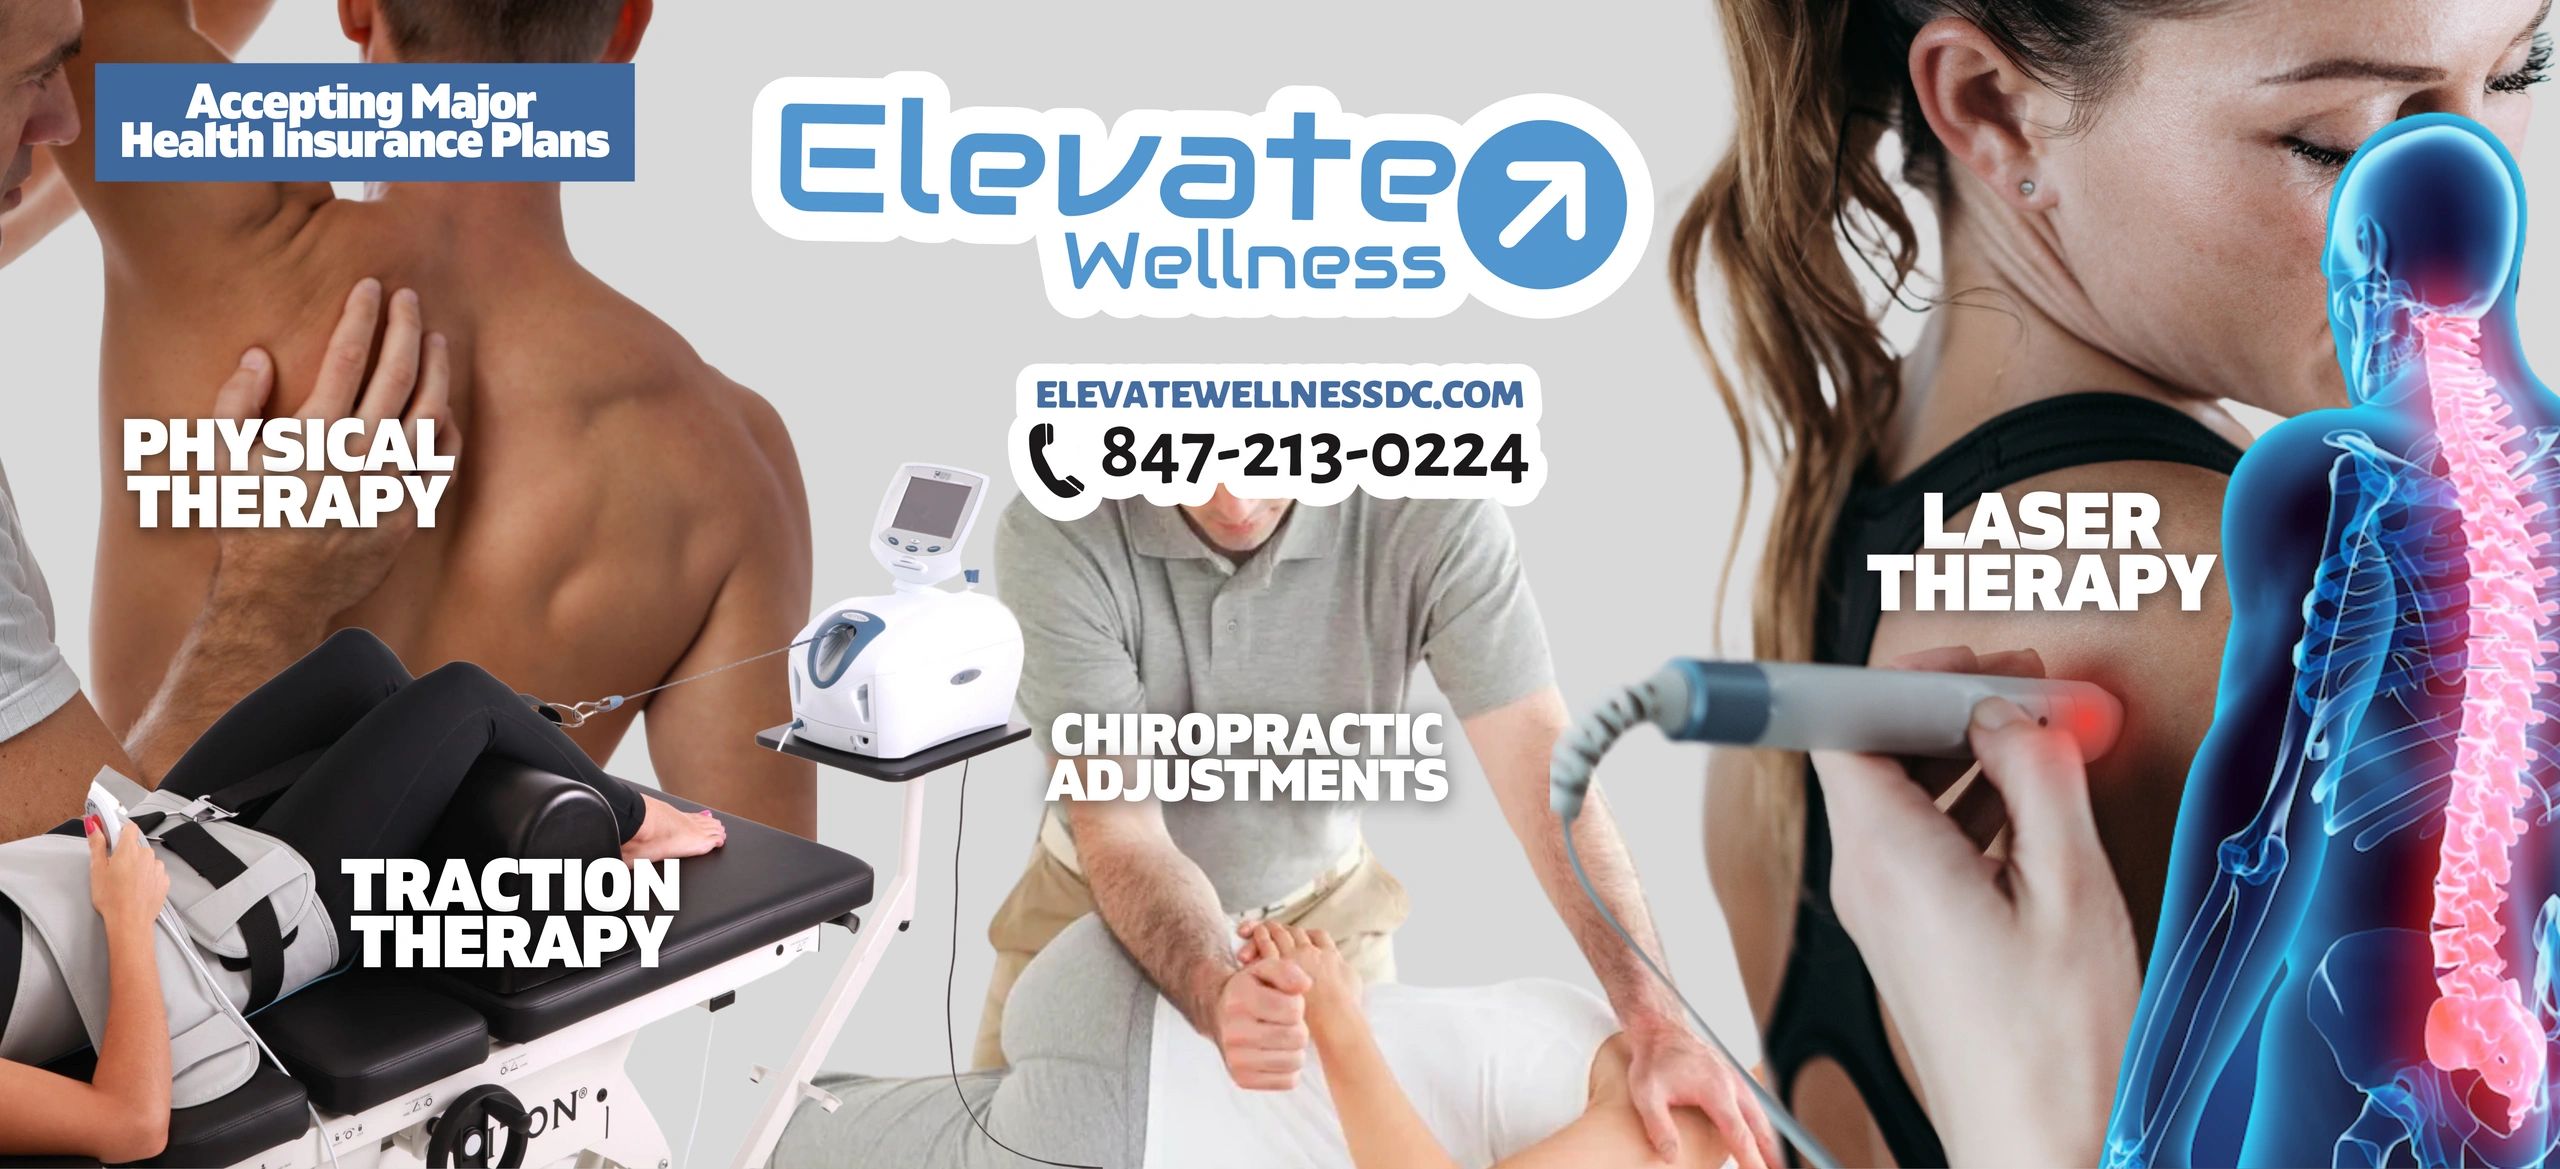 Chiropractor
Physical Therapy
Traction Therapy
Laser therapy
Chiropractor Near Me